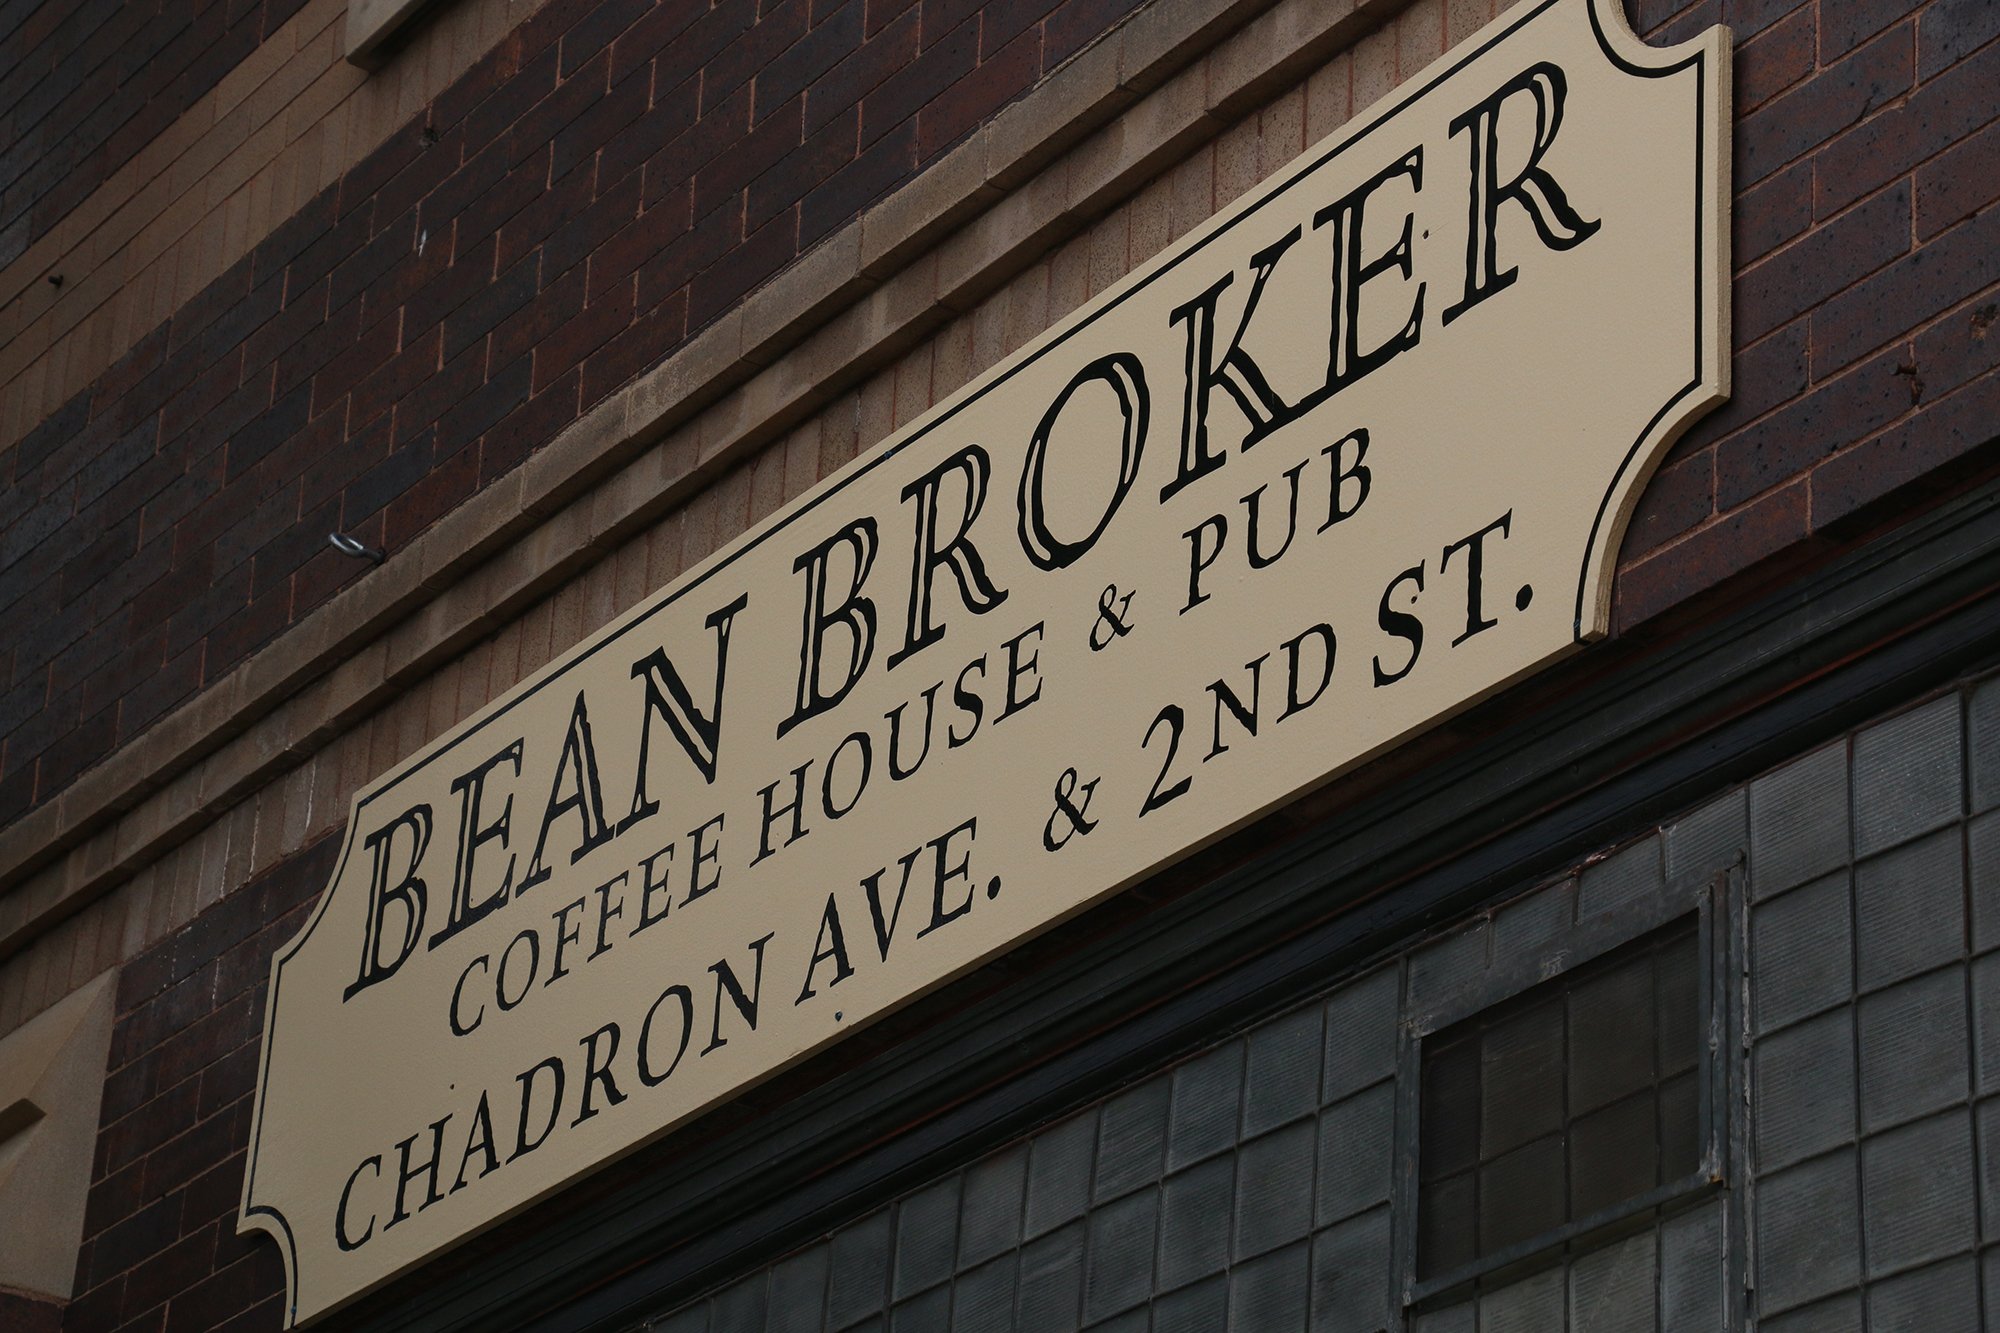 Exterior of Bean Broker Coffee in Chadron.